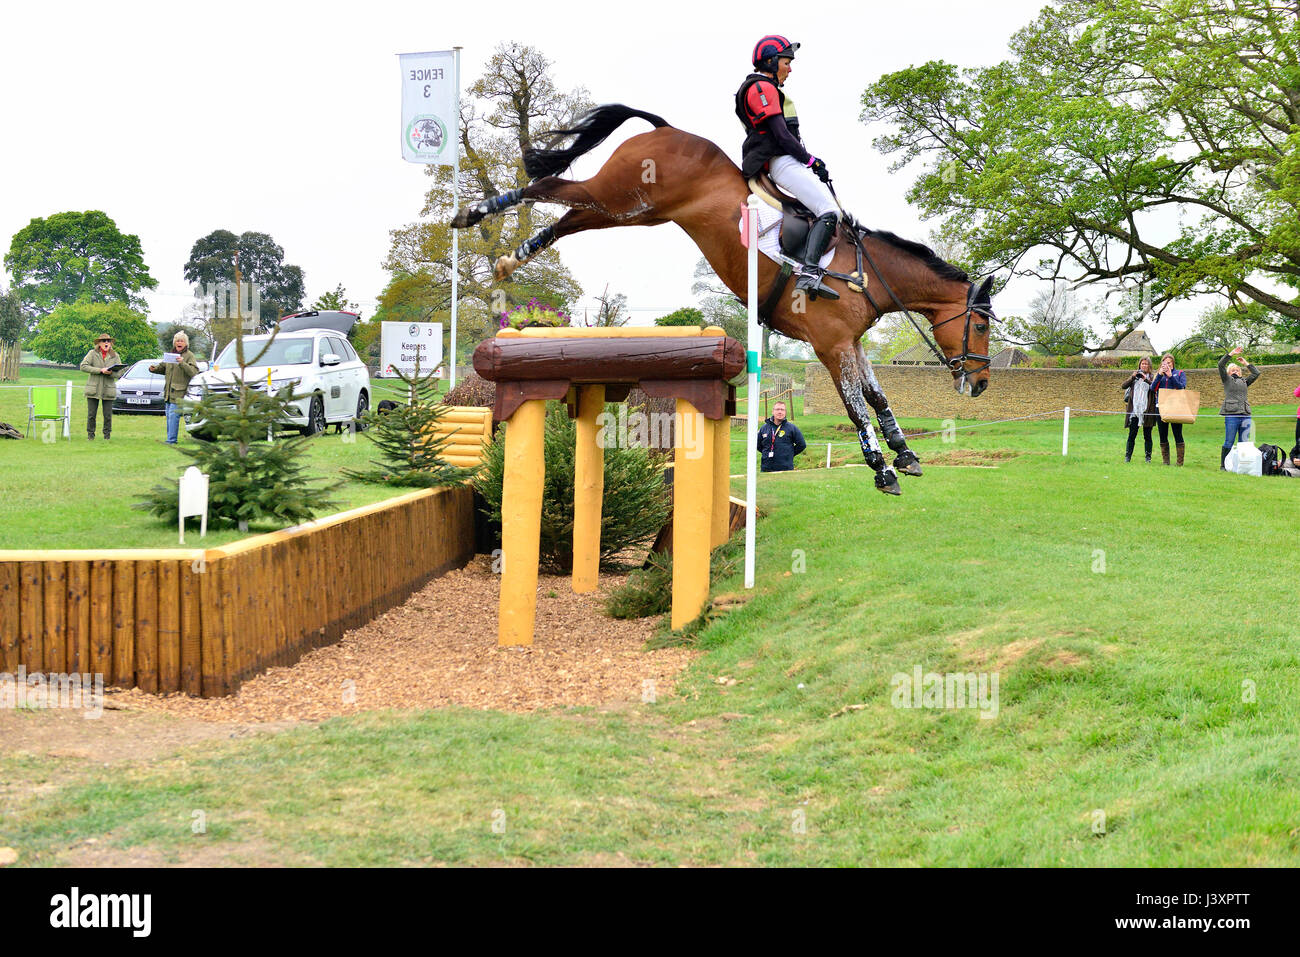 Spectacular fall at fence 3,Badminton Horse Trials 2017,Topwood Beau & English rider Emily Gilruth taking a tumble and hospitalized due to head injury Stock Photo